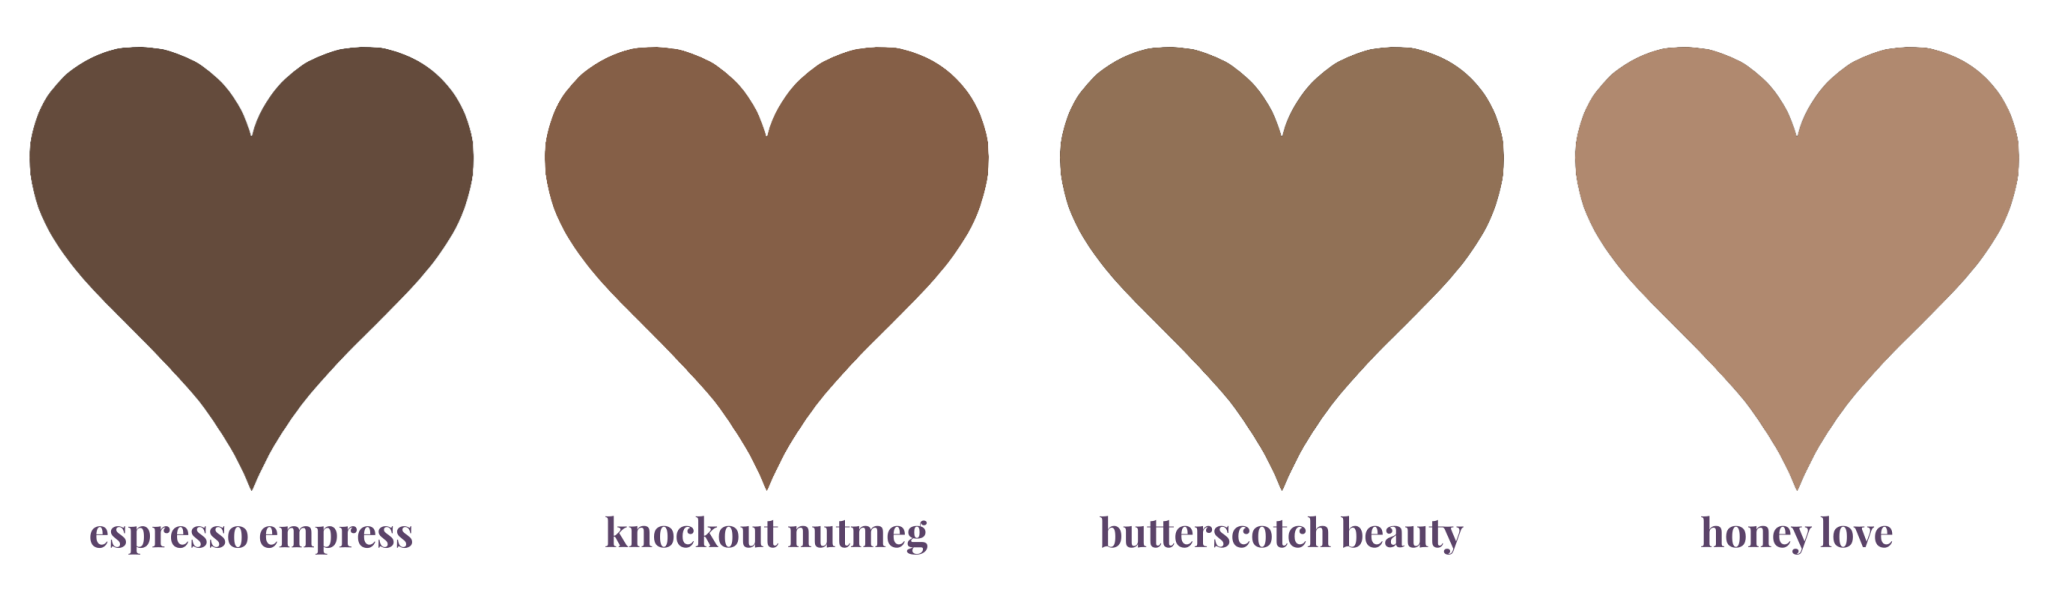 Four Shades of Brown Bras